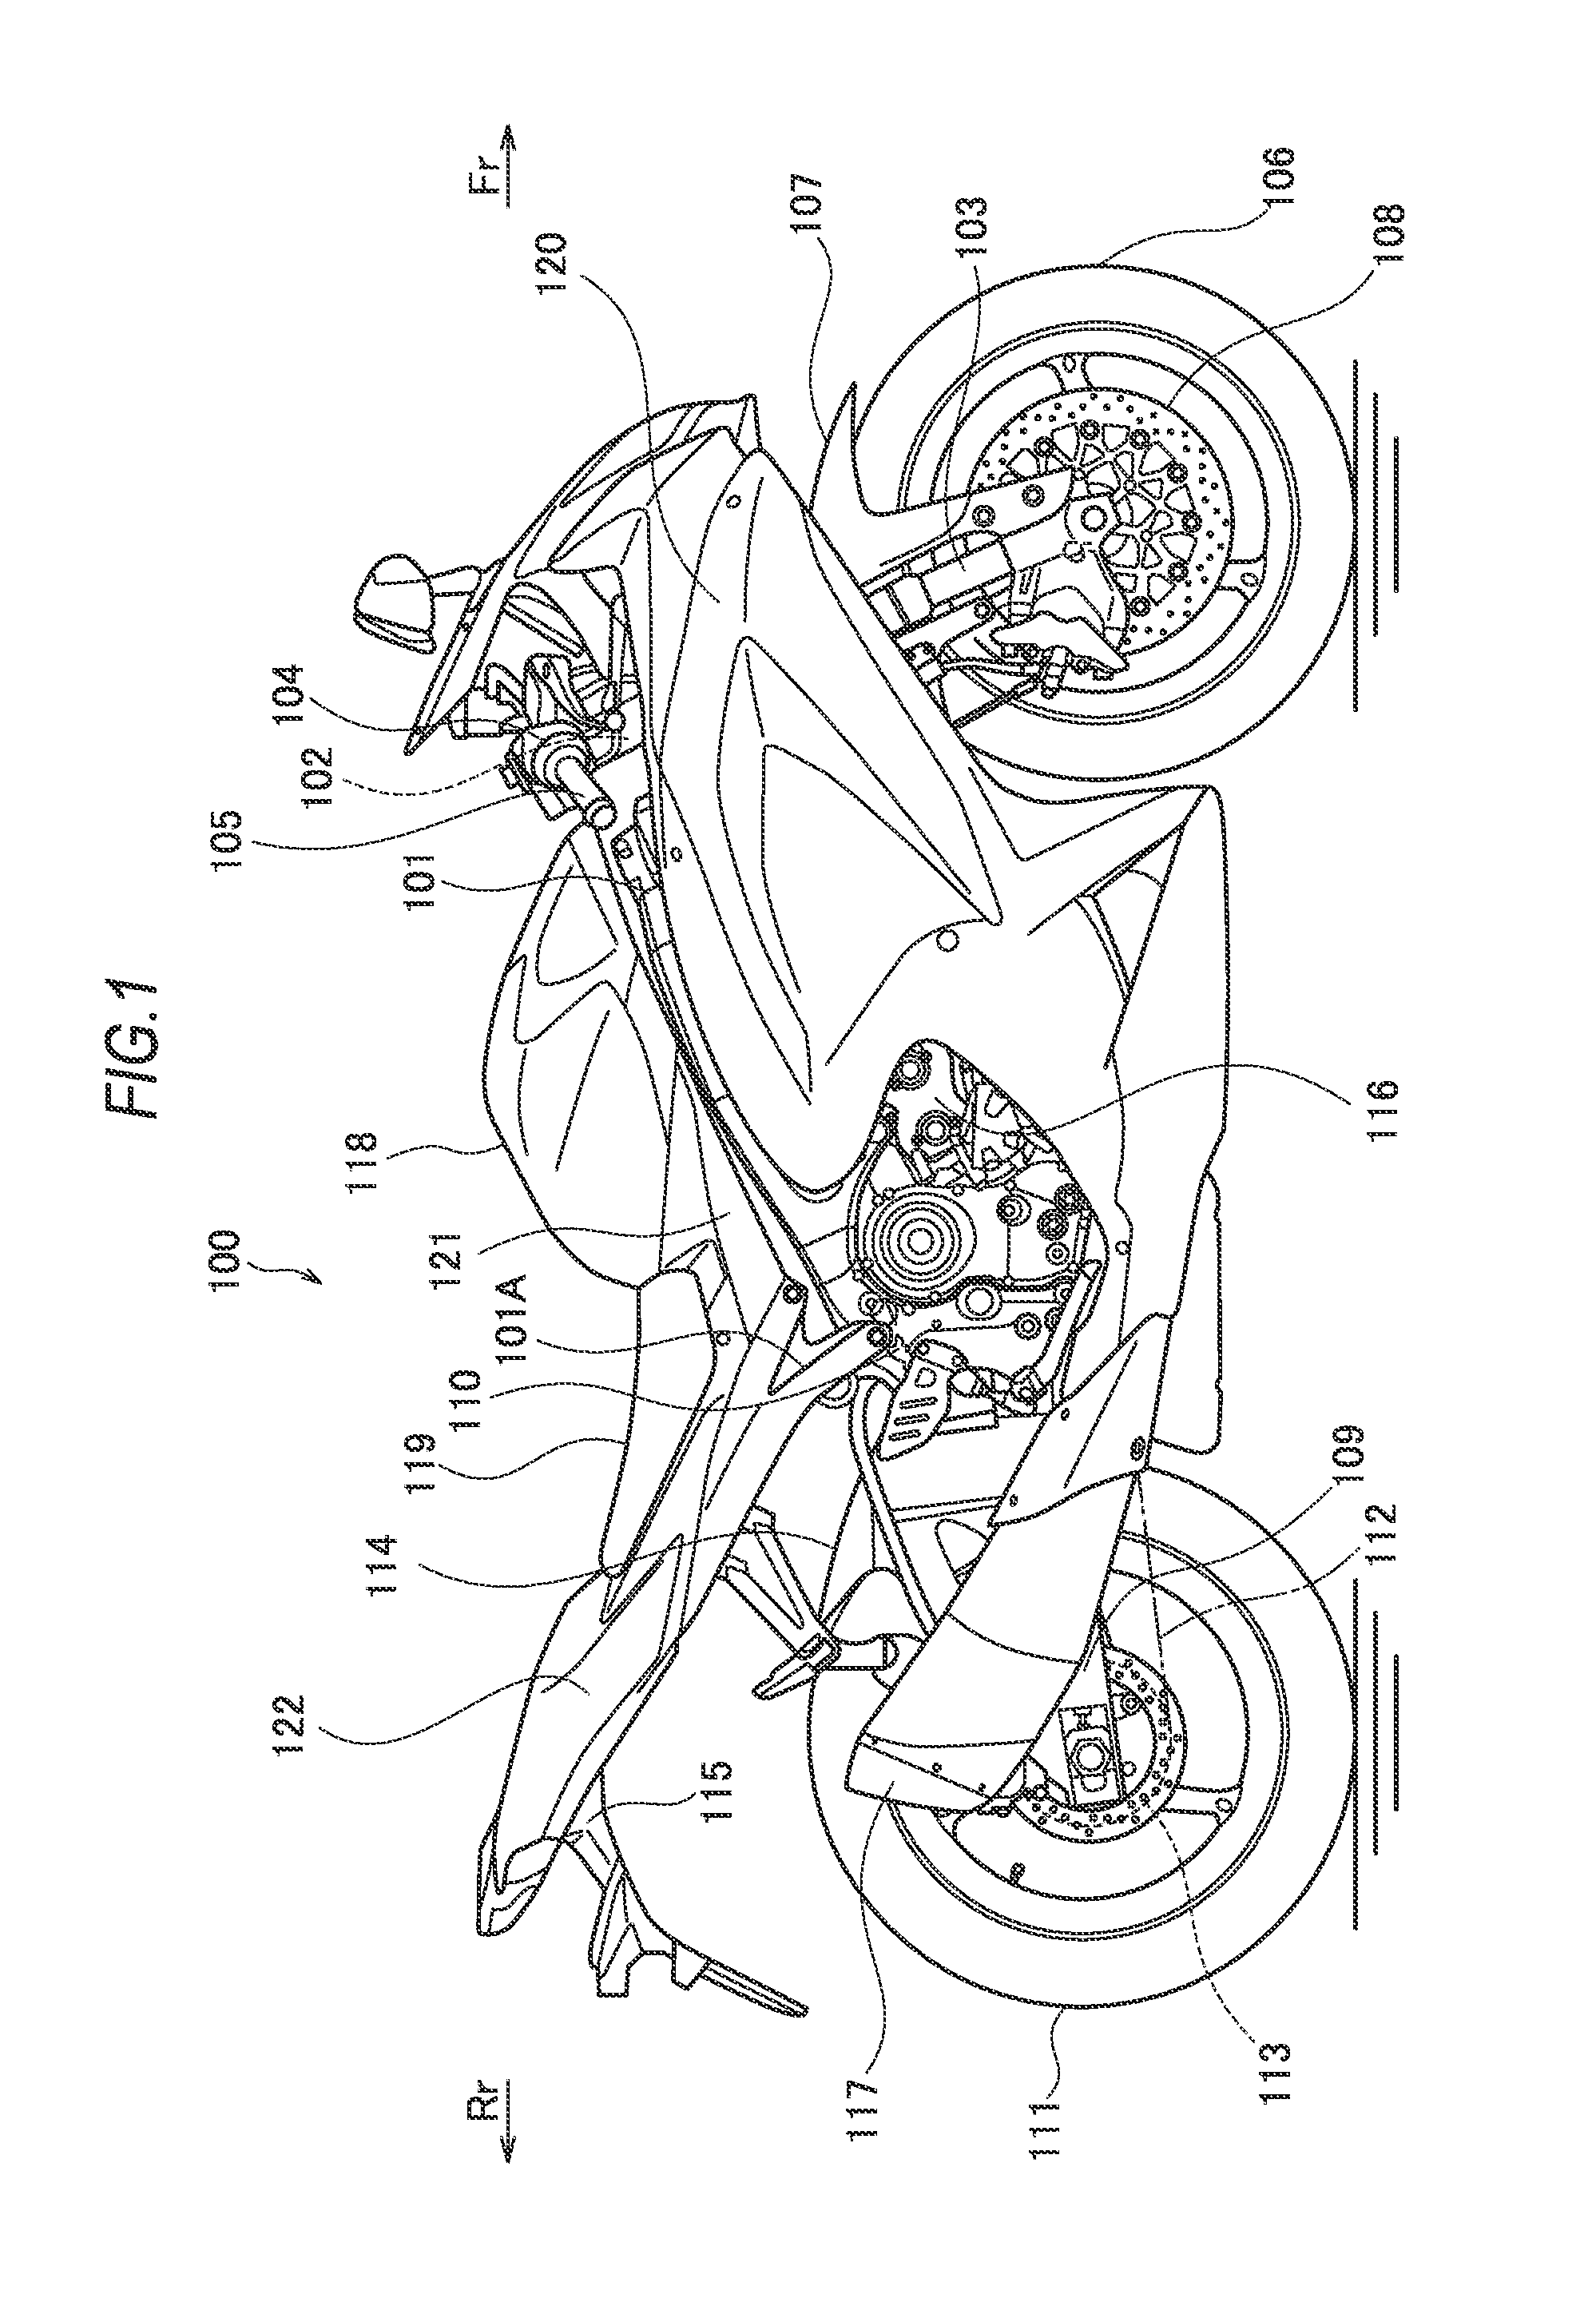 Fuel supply apparatus of internal combustion engine